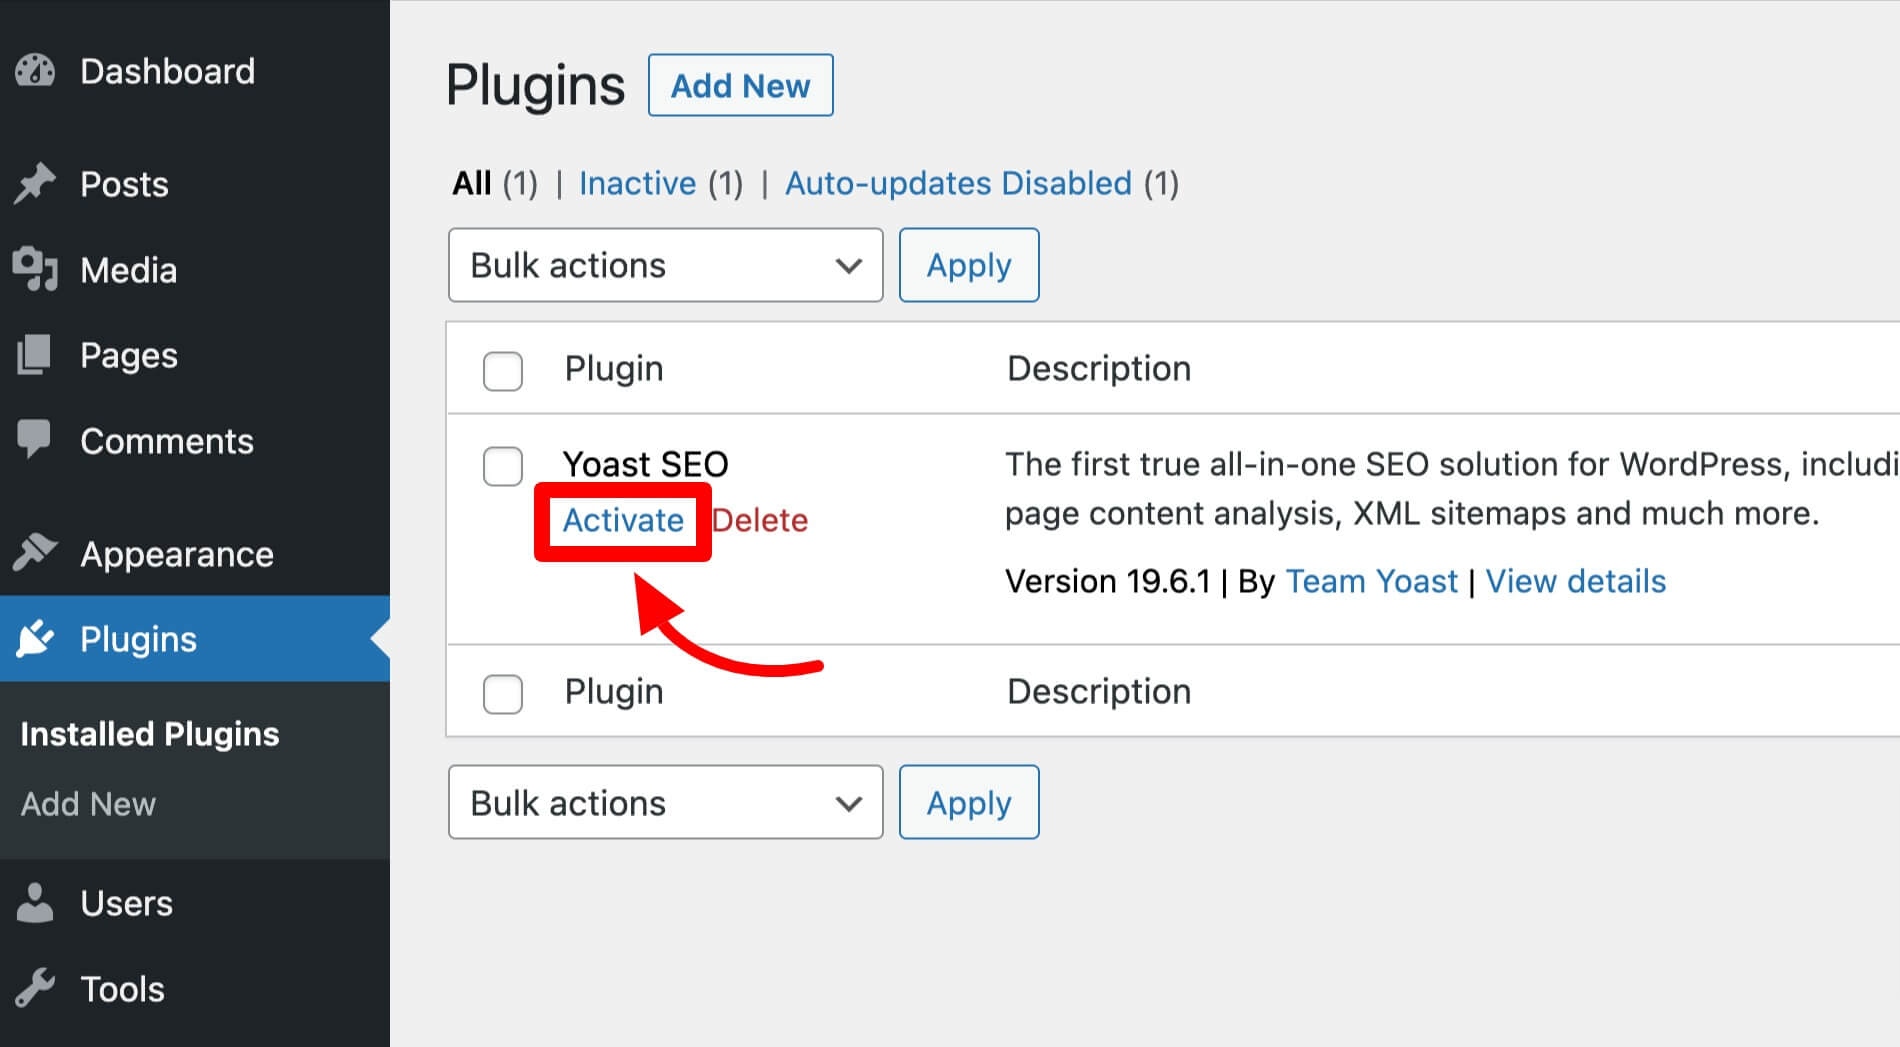 Activate plugin from Installed Plugins section